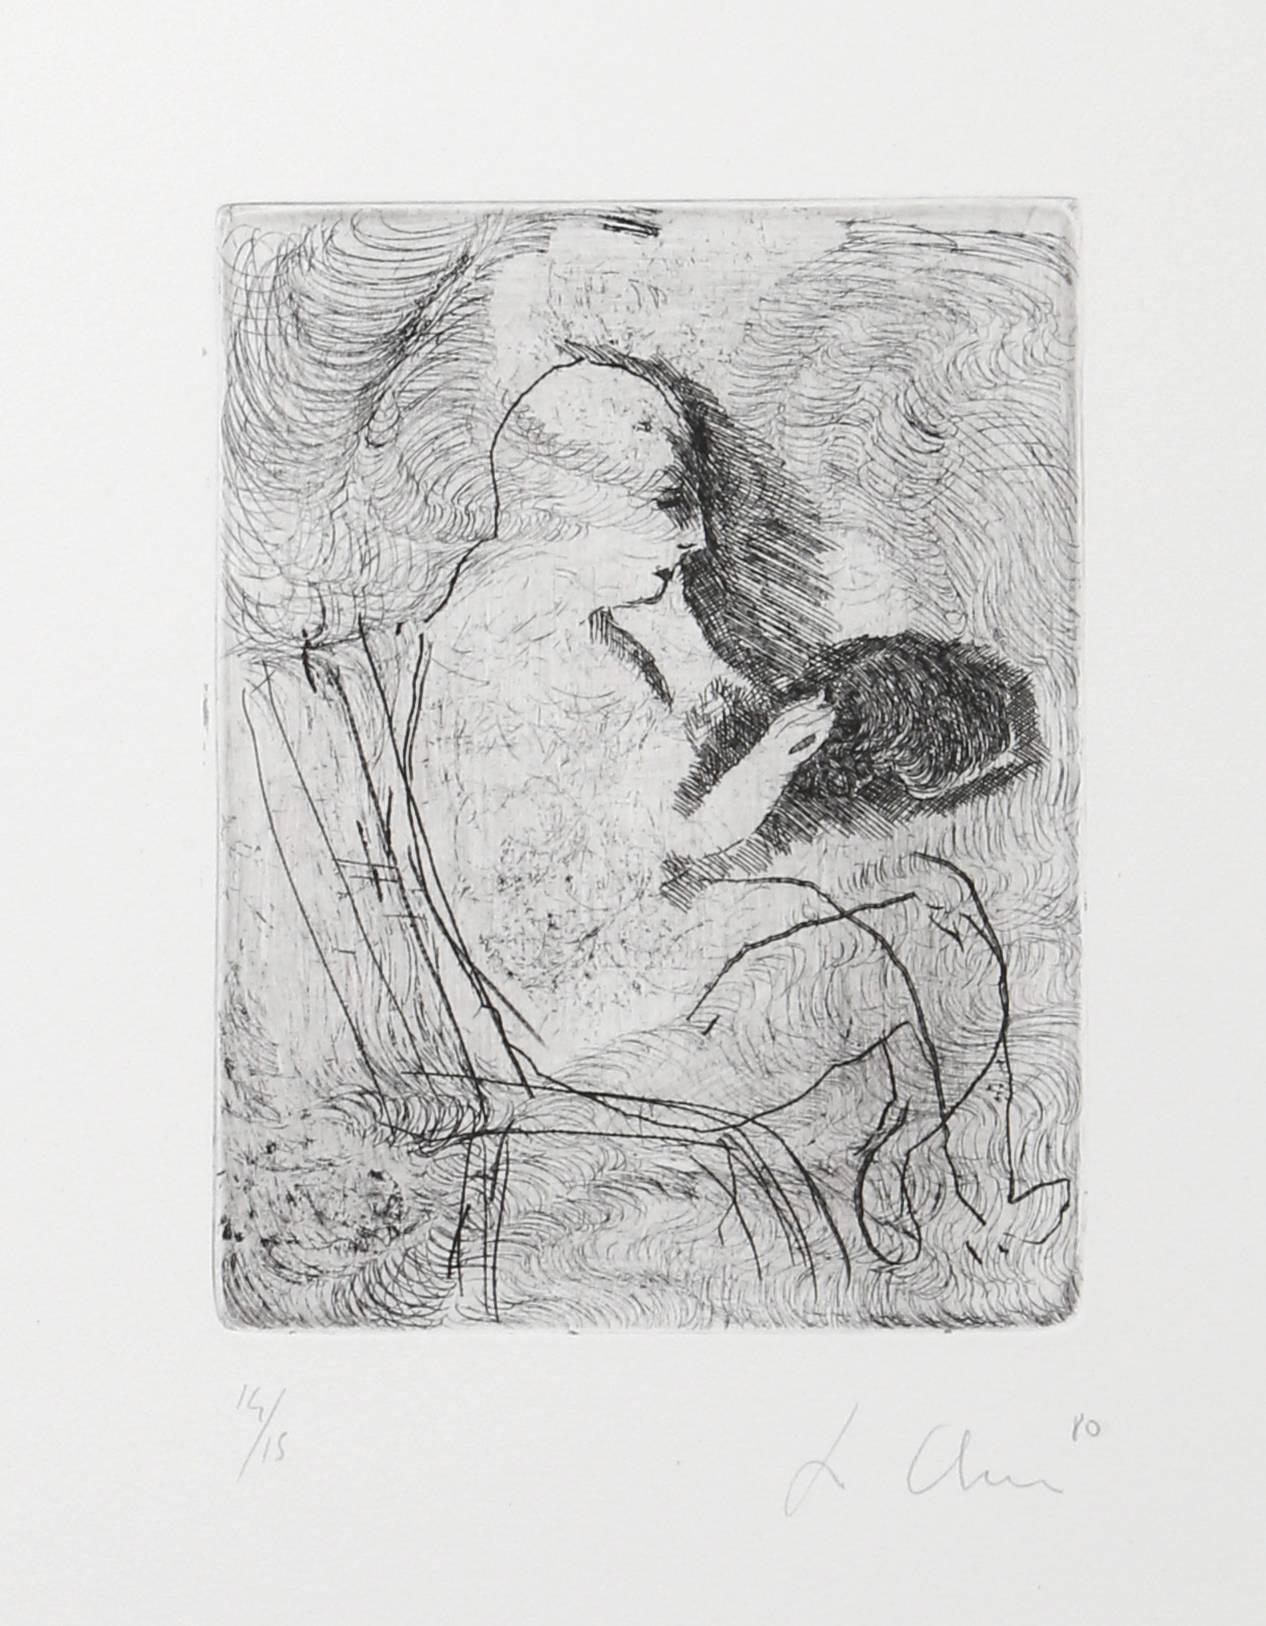 This etching was created by Italian artist Sandro Chia. Chia referred to his early productions as ‘mythical conceptual art,’ and in the late 1970s he returned to painting and quickly established himself as a major artist of the movement in Italian